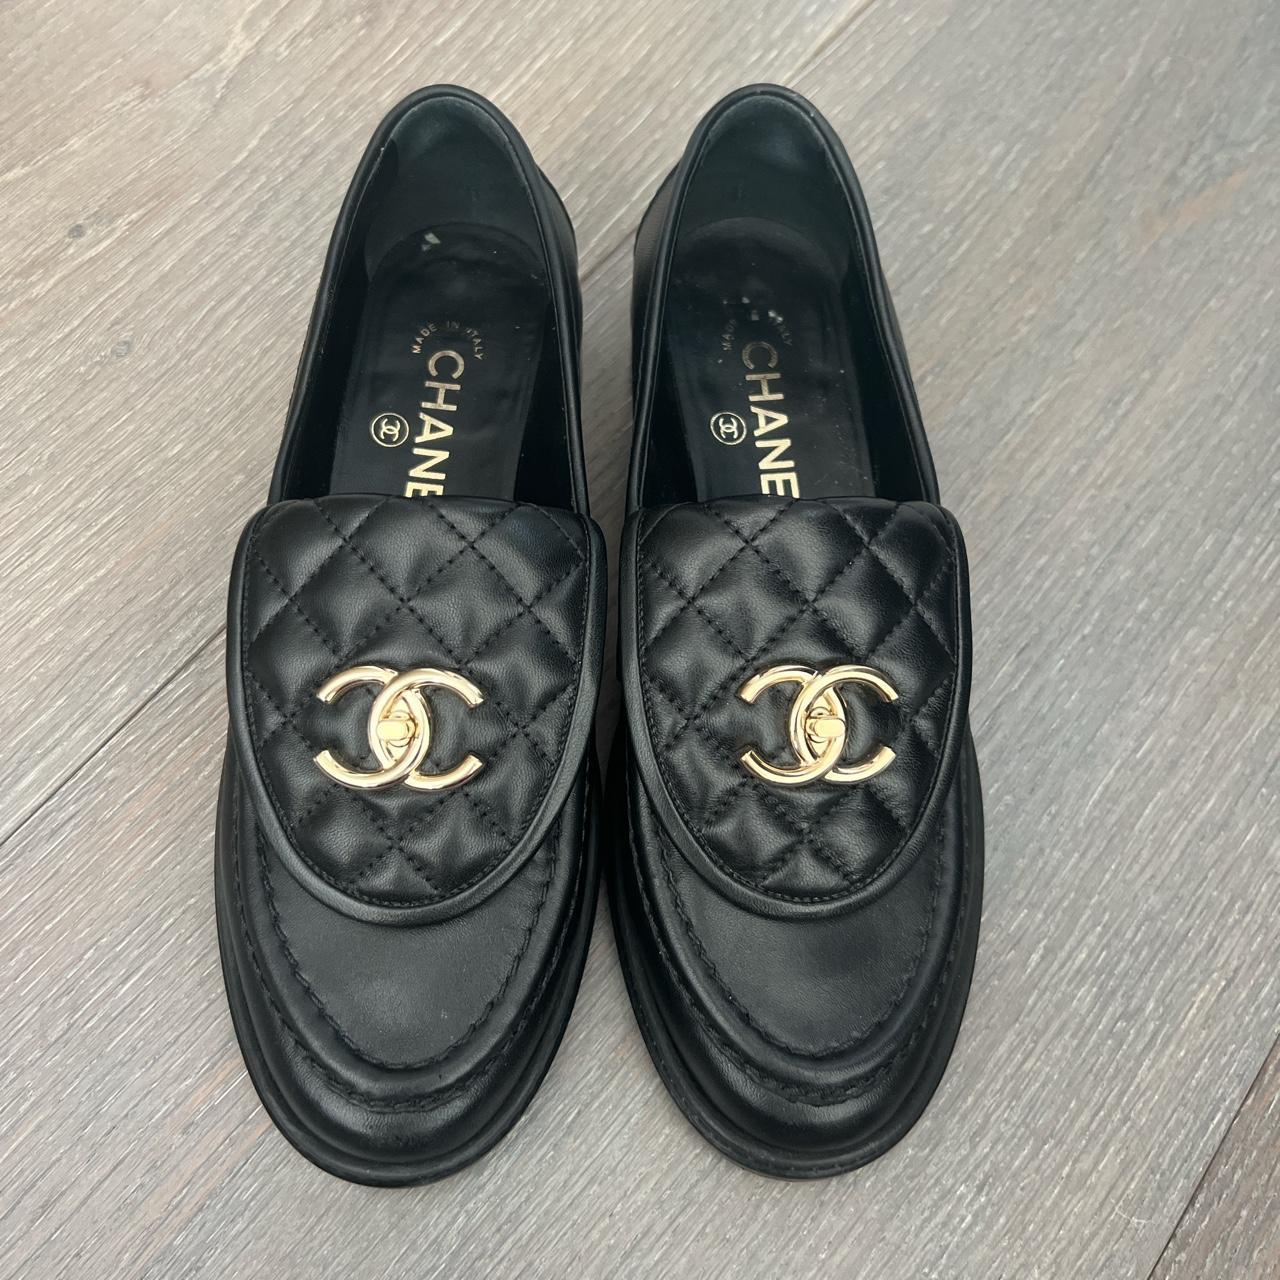 Chanel Chanel Black Dust Bag For Shoes